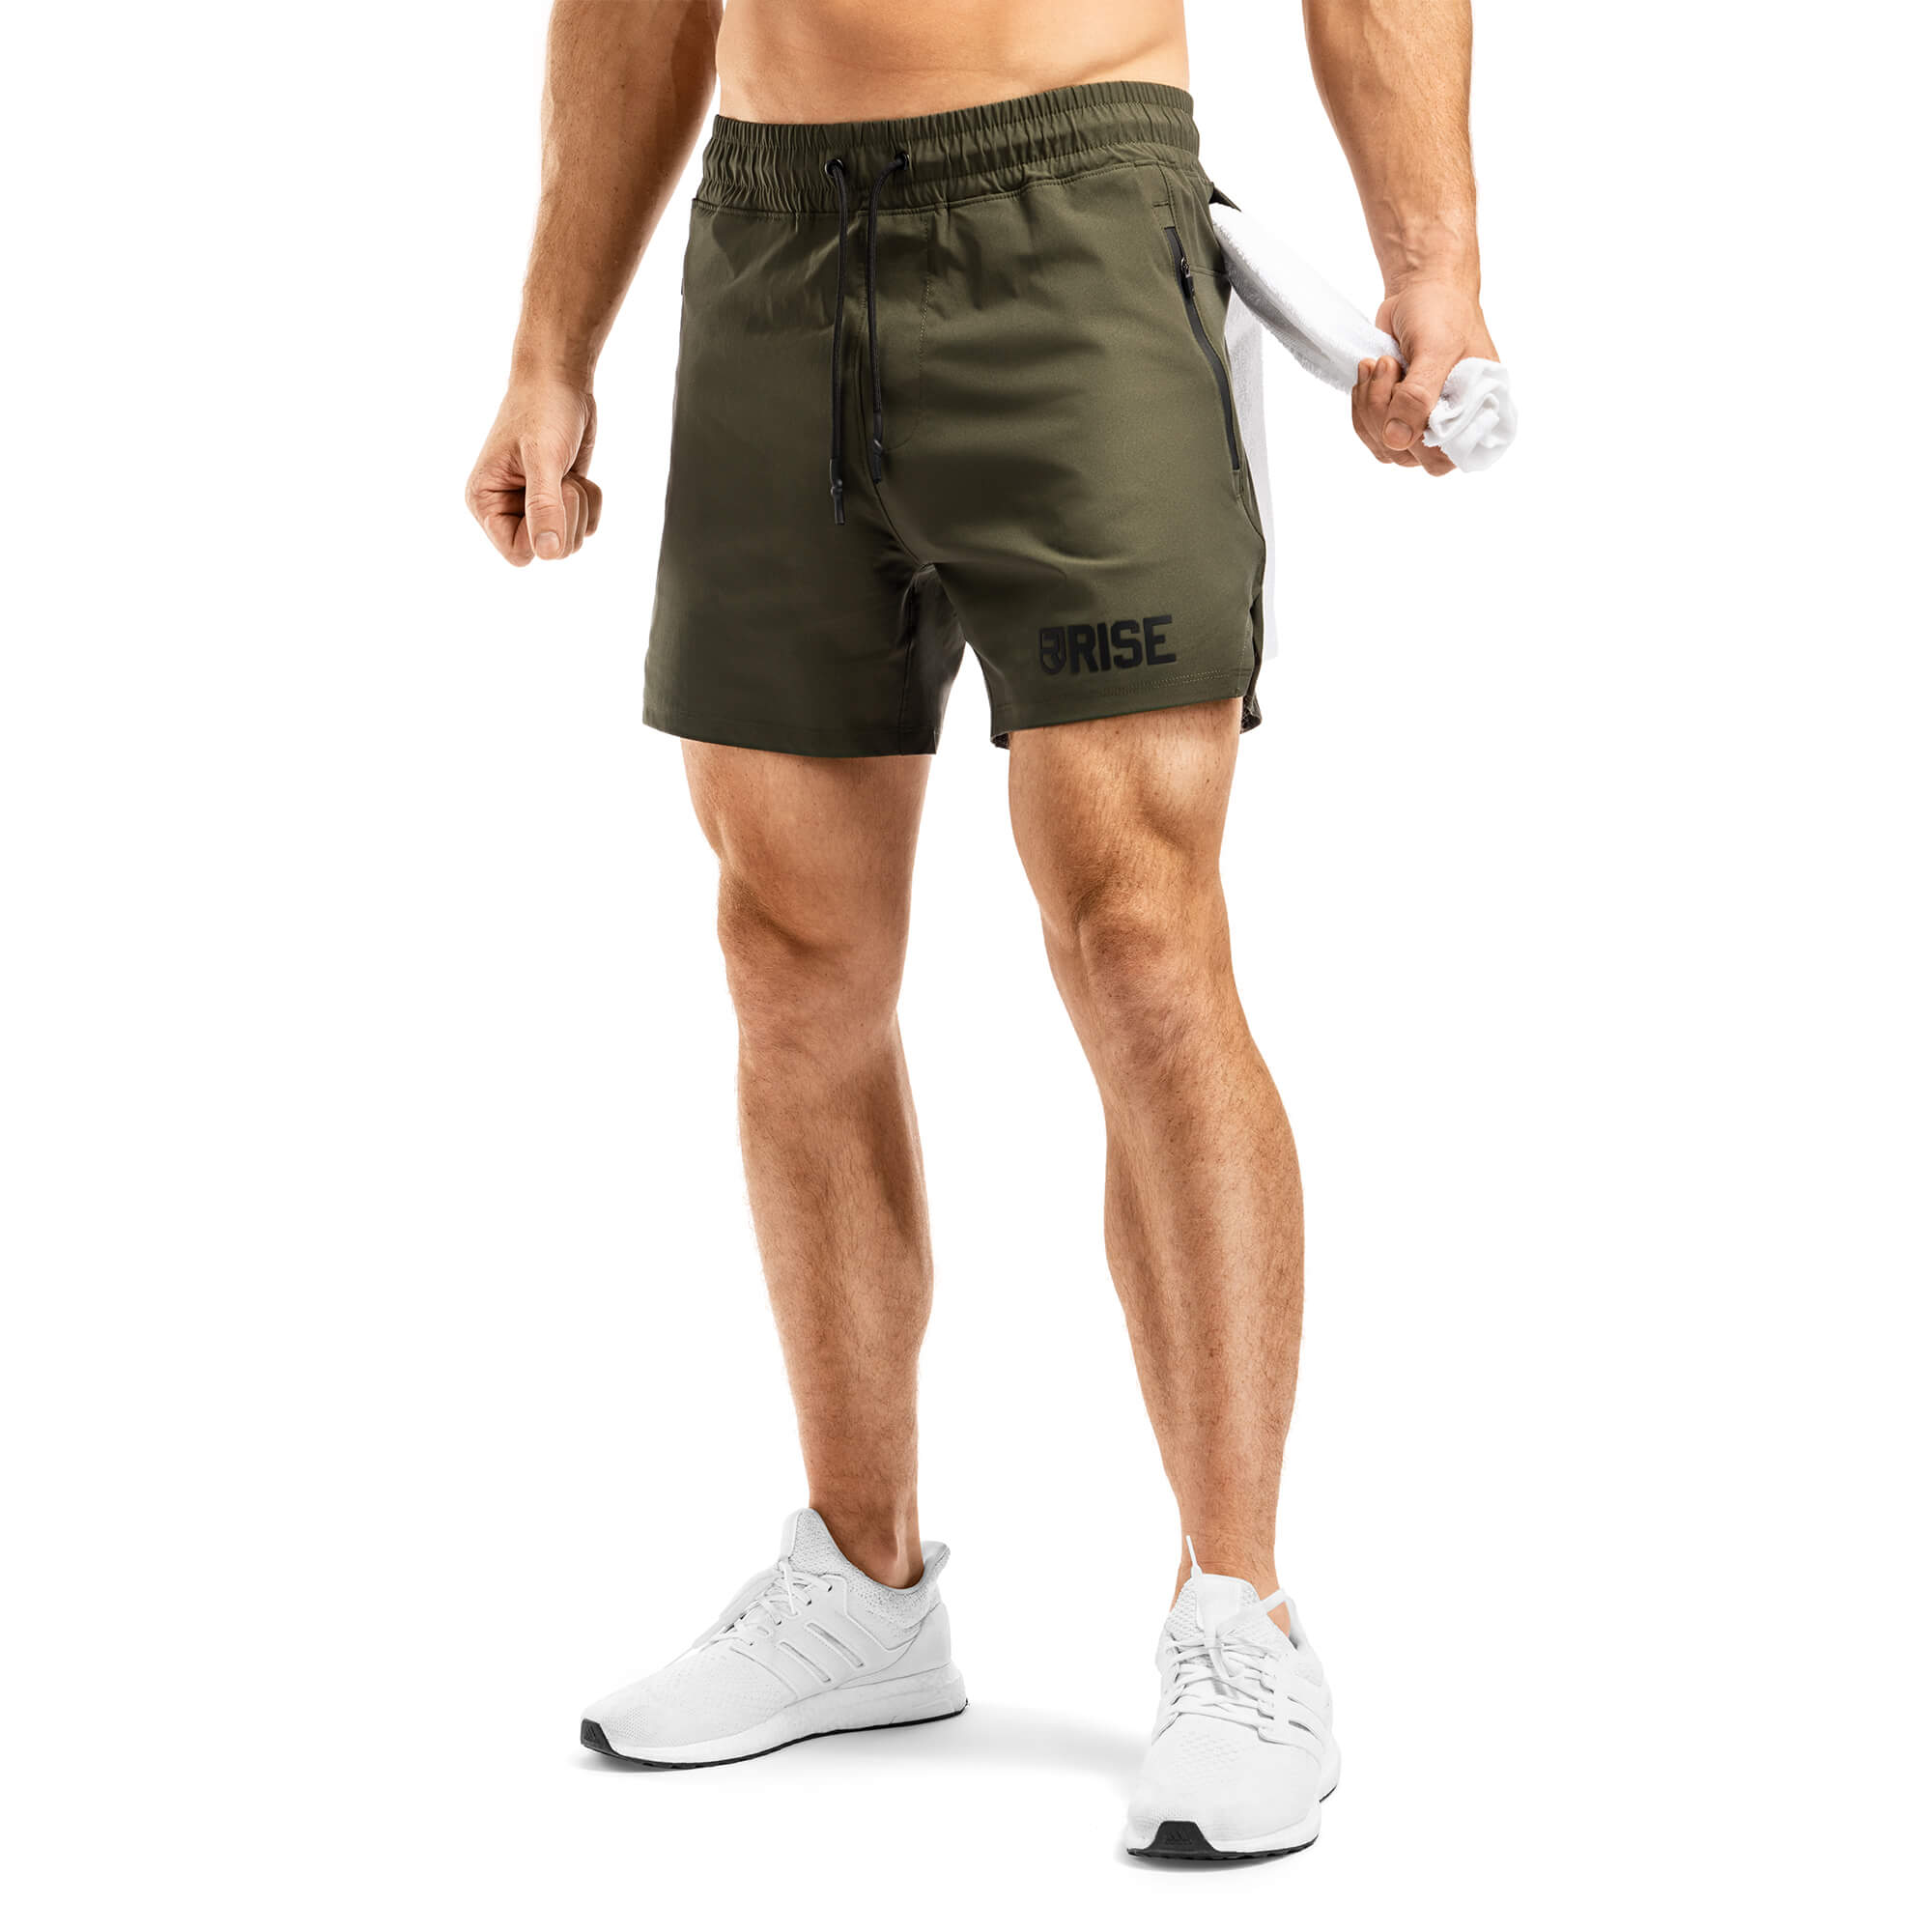 Rest Later Shorts 5" - Army Green